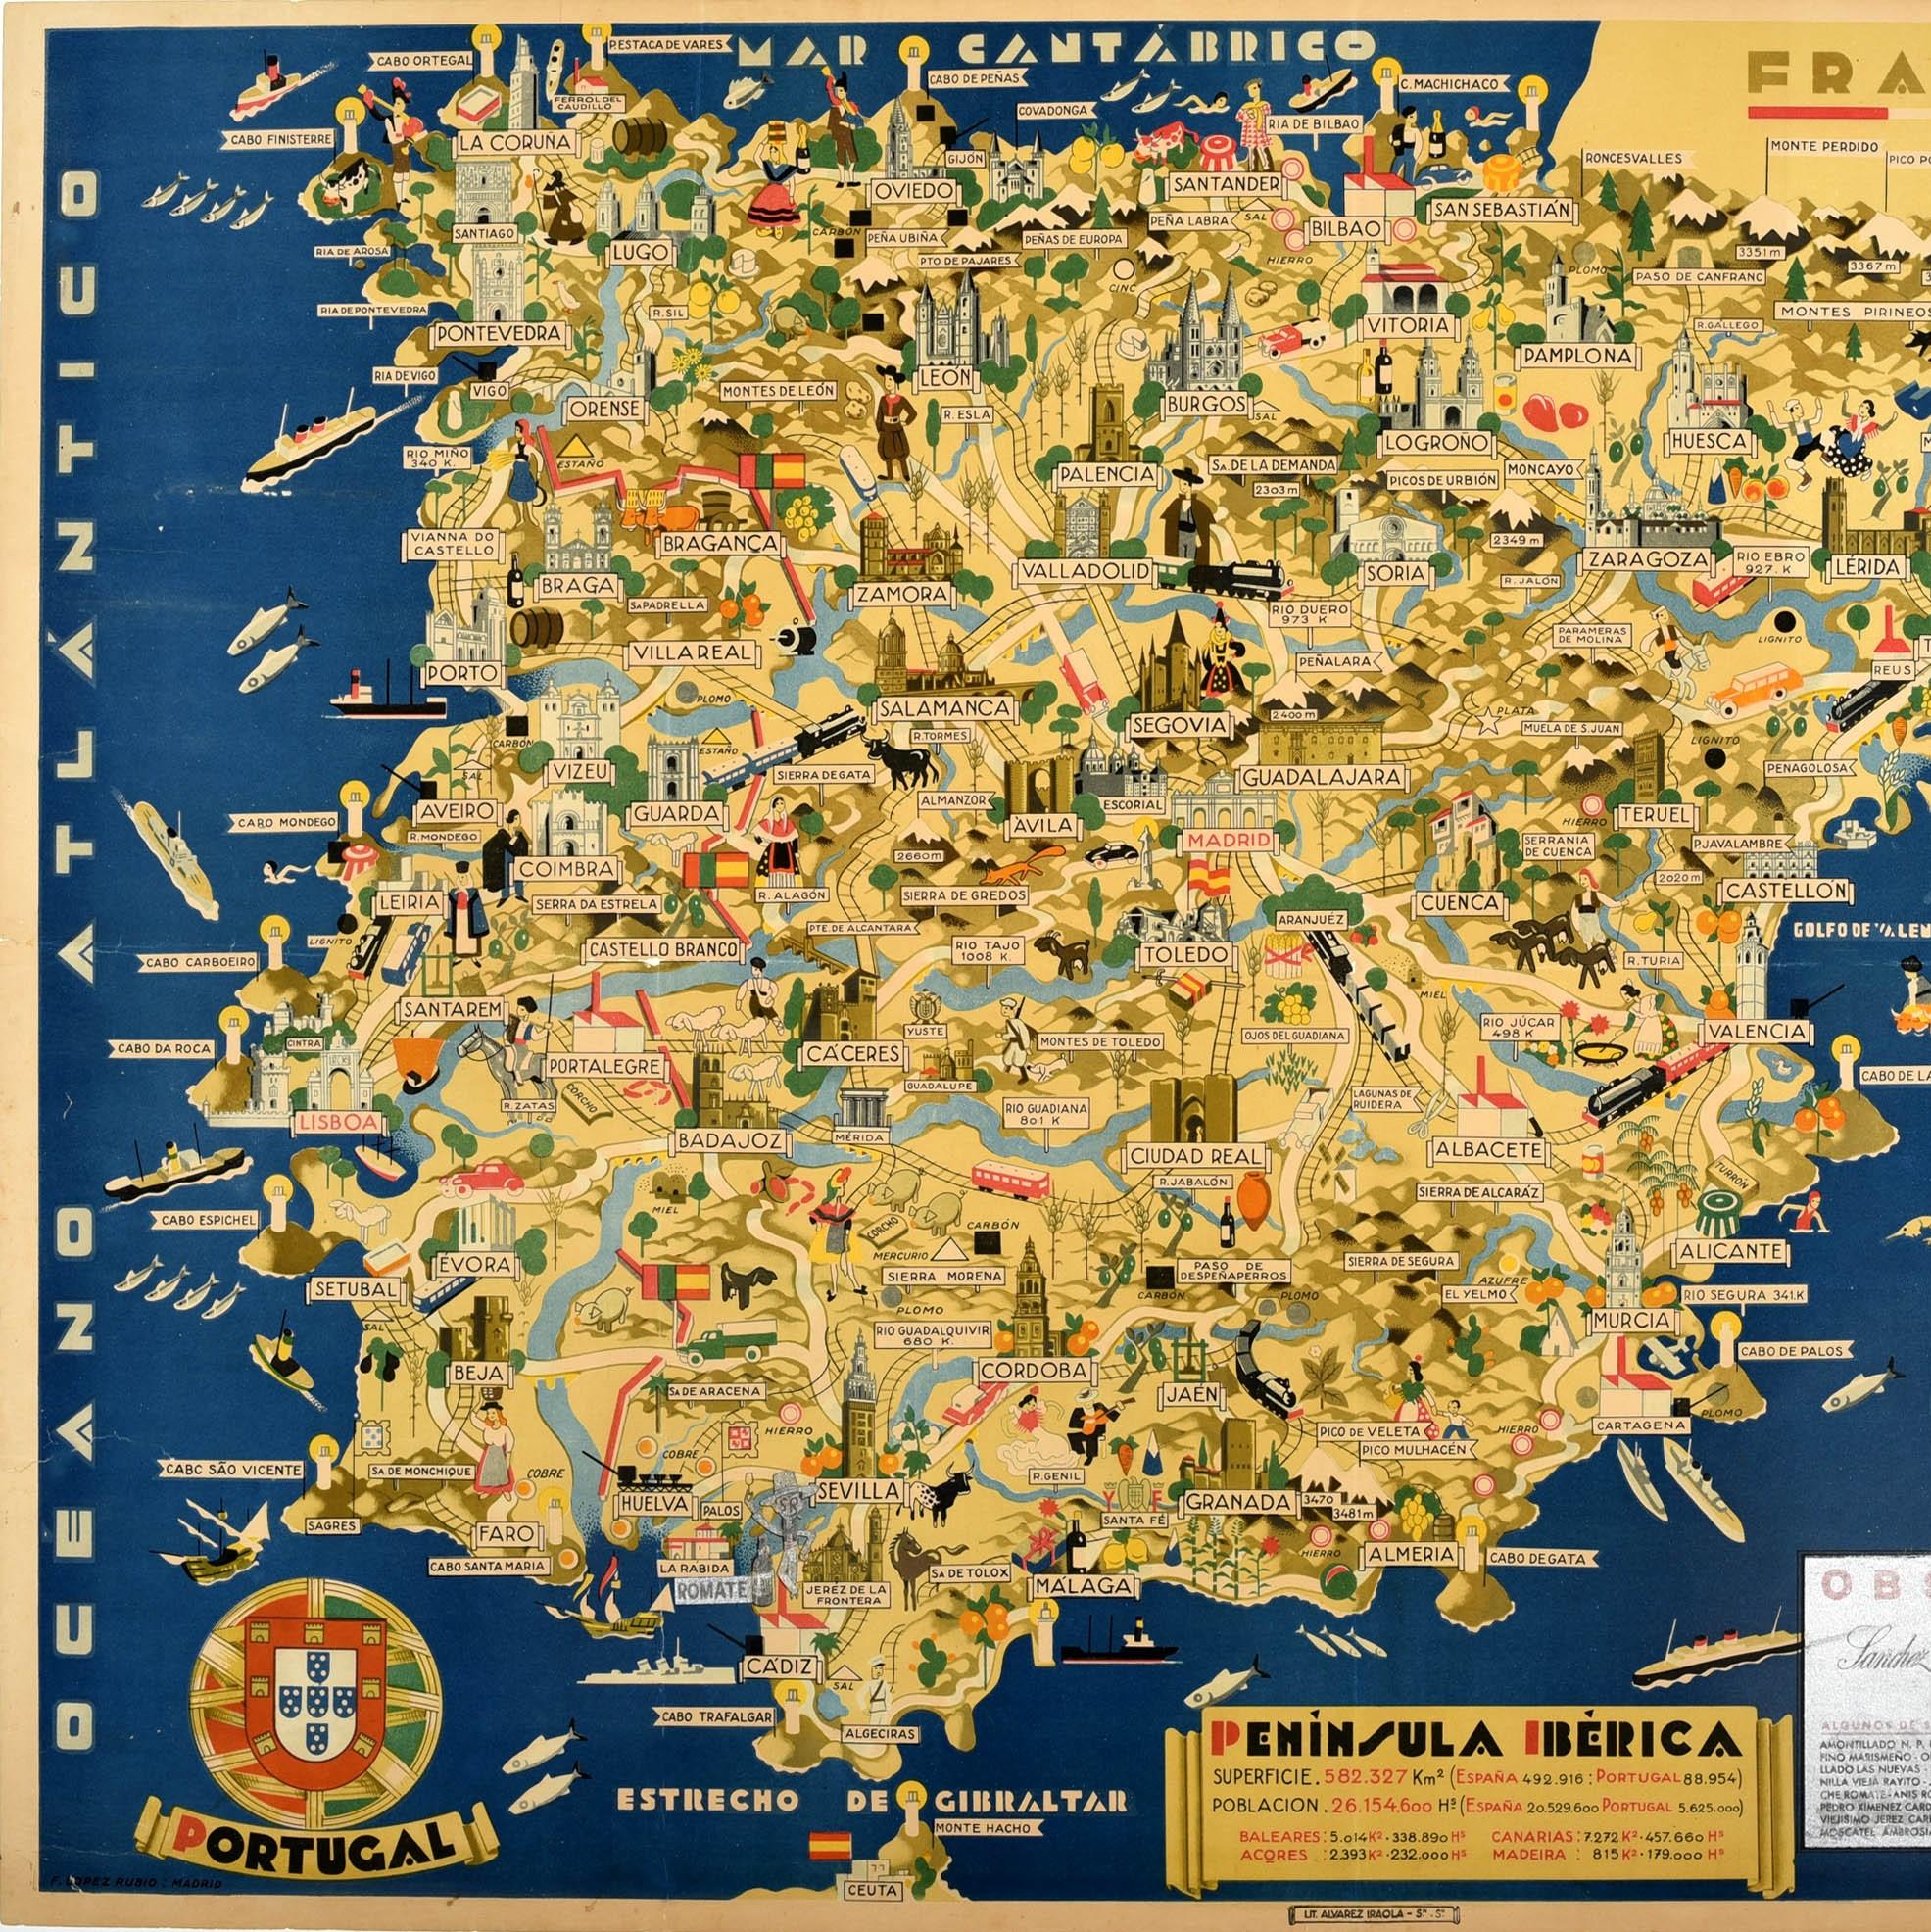 Original vintage pictorial travel poster for Spain and Portugal featuring a colourful illustrated map of the Iberian Peninsula Iberica depicting images of various places of natural and historical interest, sports and activities including cathedrals,